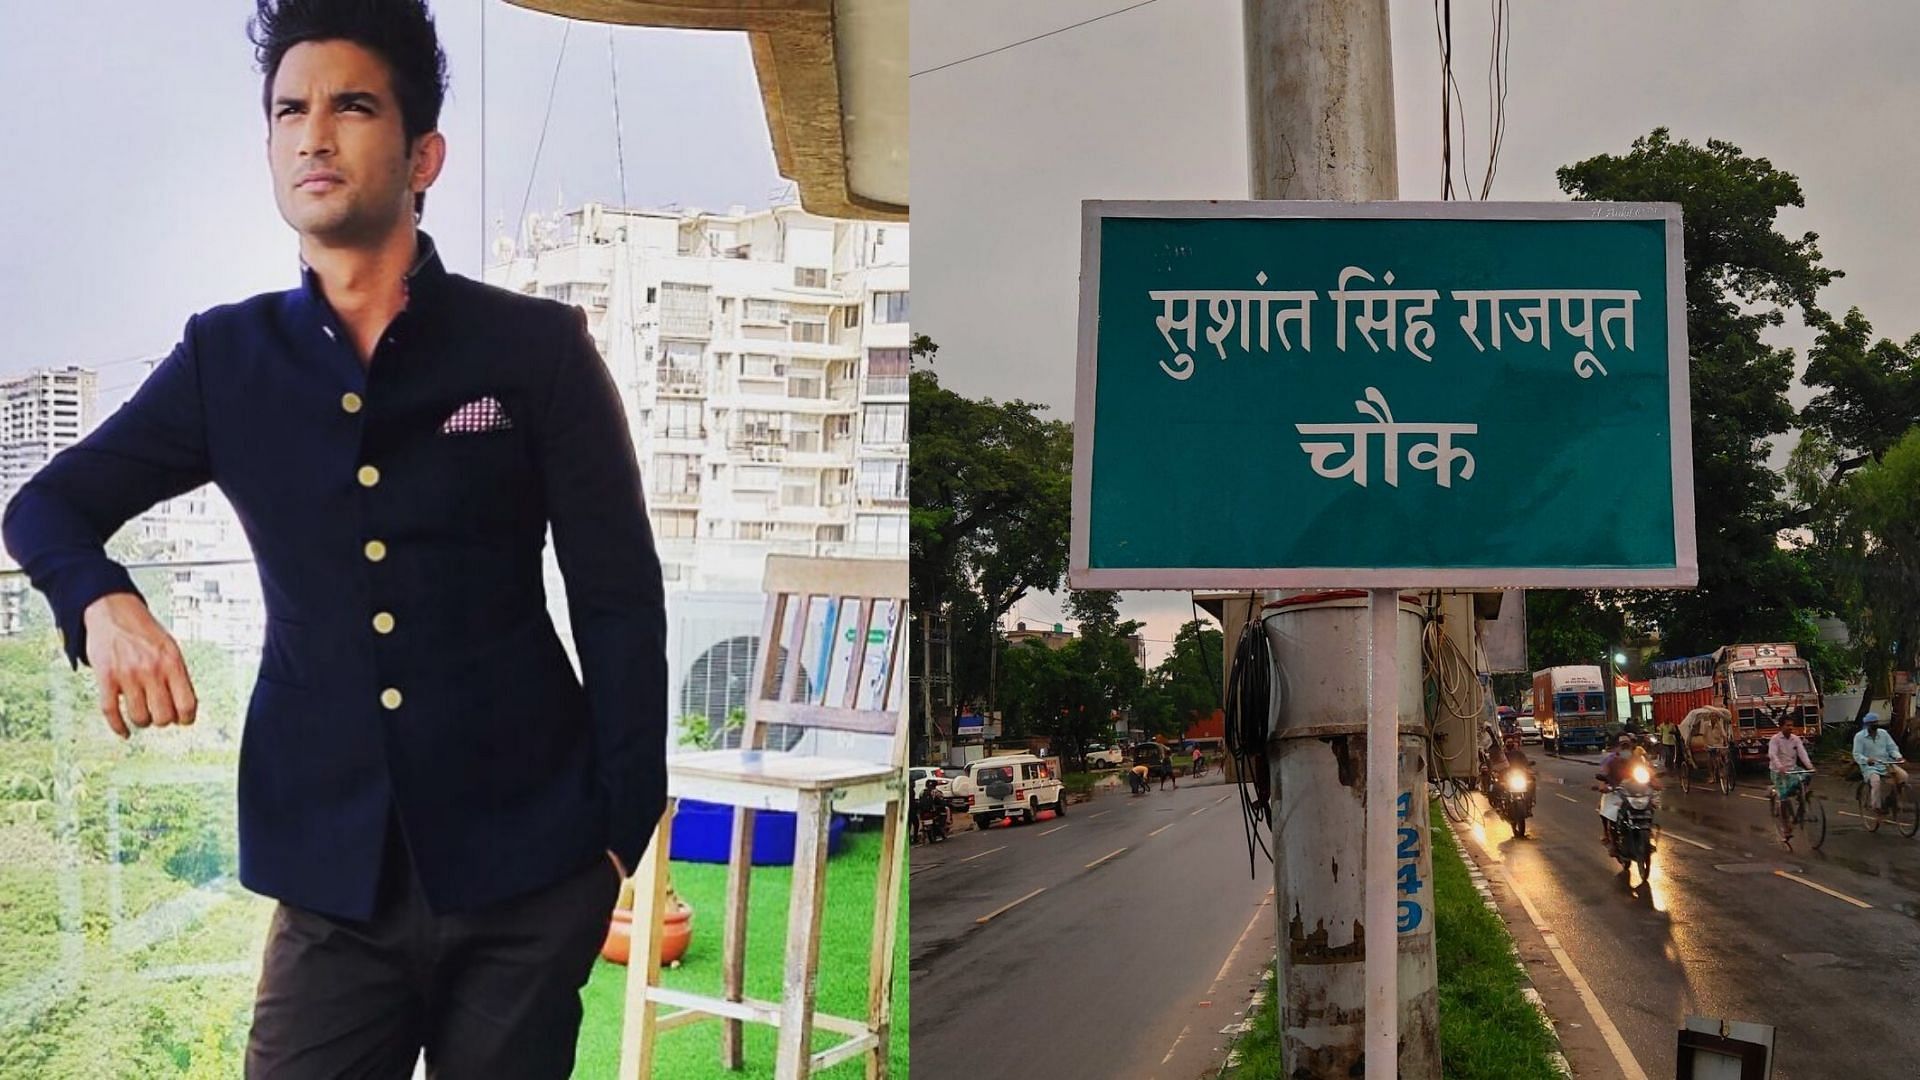 Street named after Sushant Singh Rajput.